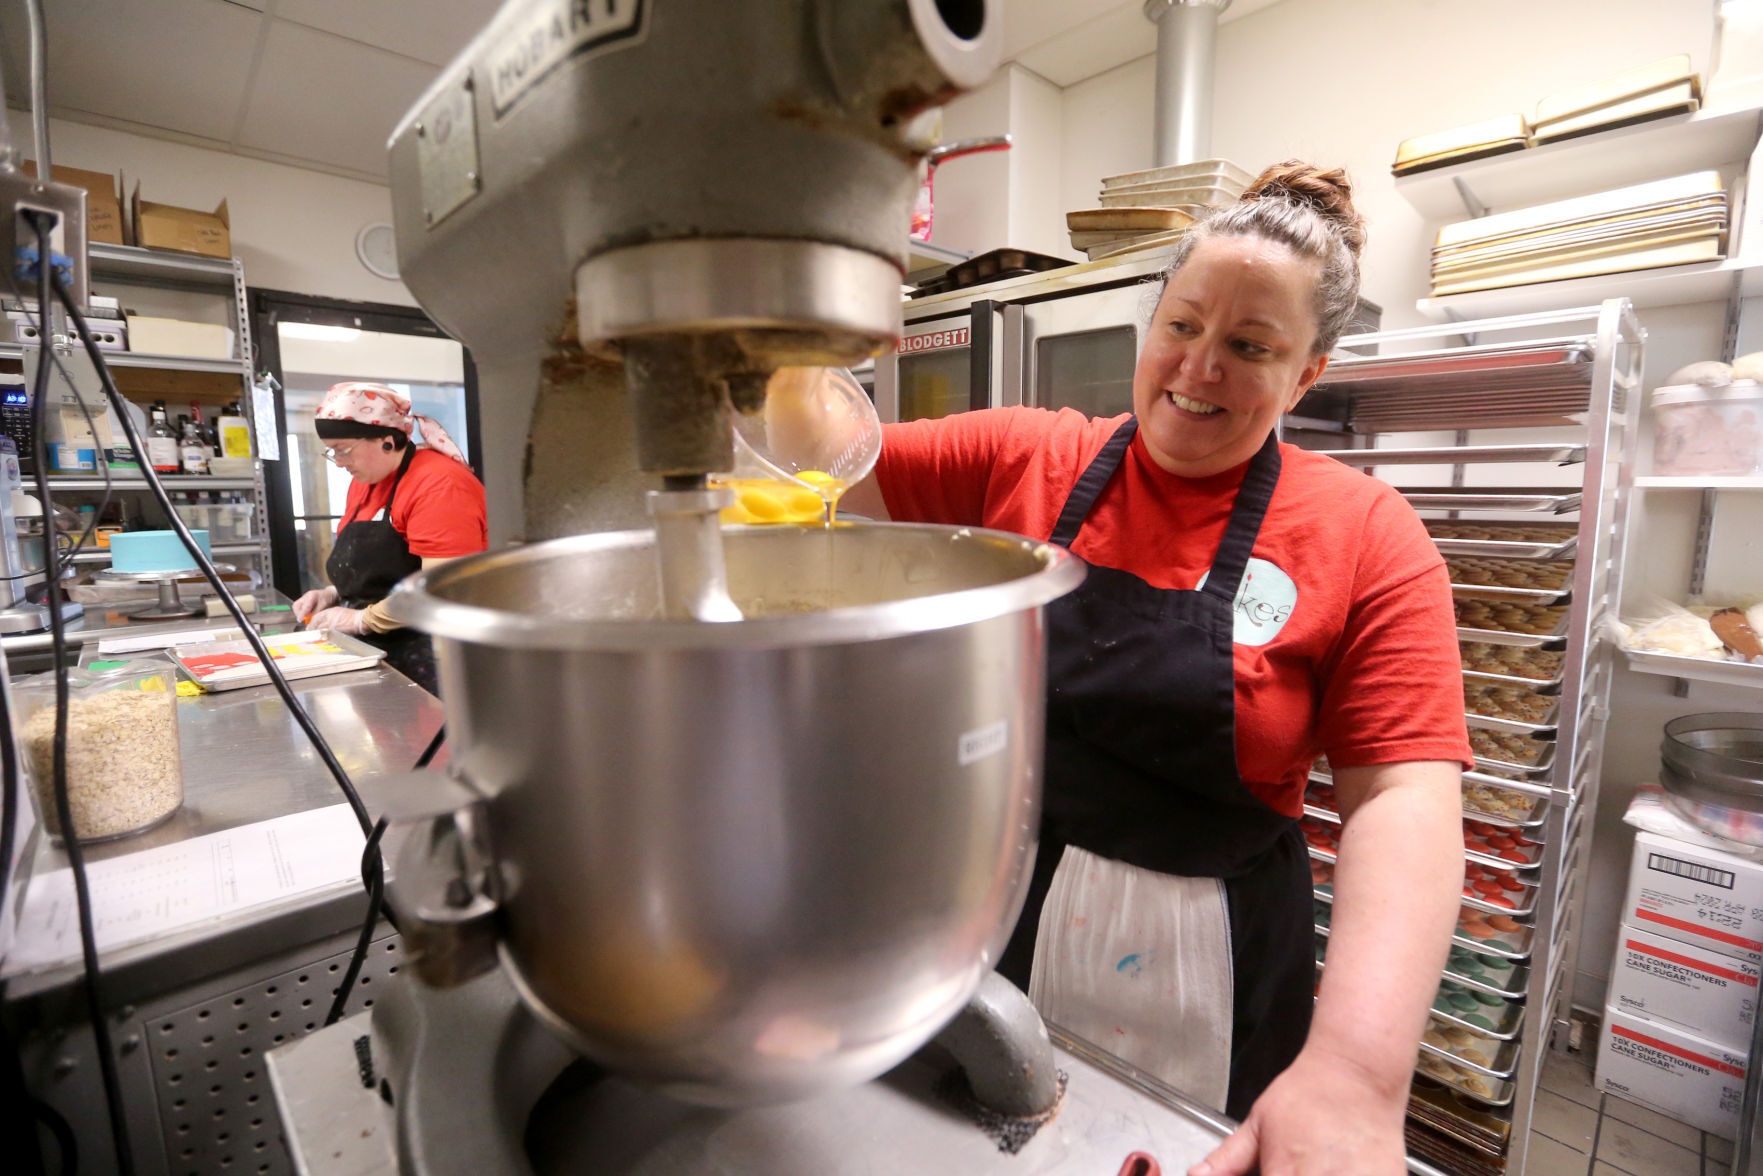 Chloe Norpel prepares cookie batter at Candle Ready Cakes in Dubuque on Thursday, June 23, 2022. The store plans to move to a new, larger location at 249 W. First St. in Dubuque.    PHOTO CREDIT: JESSICA REILLY